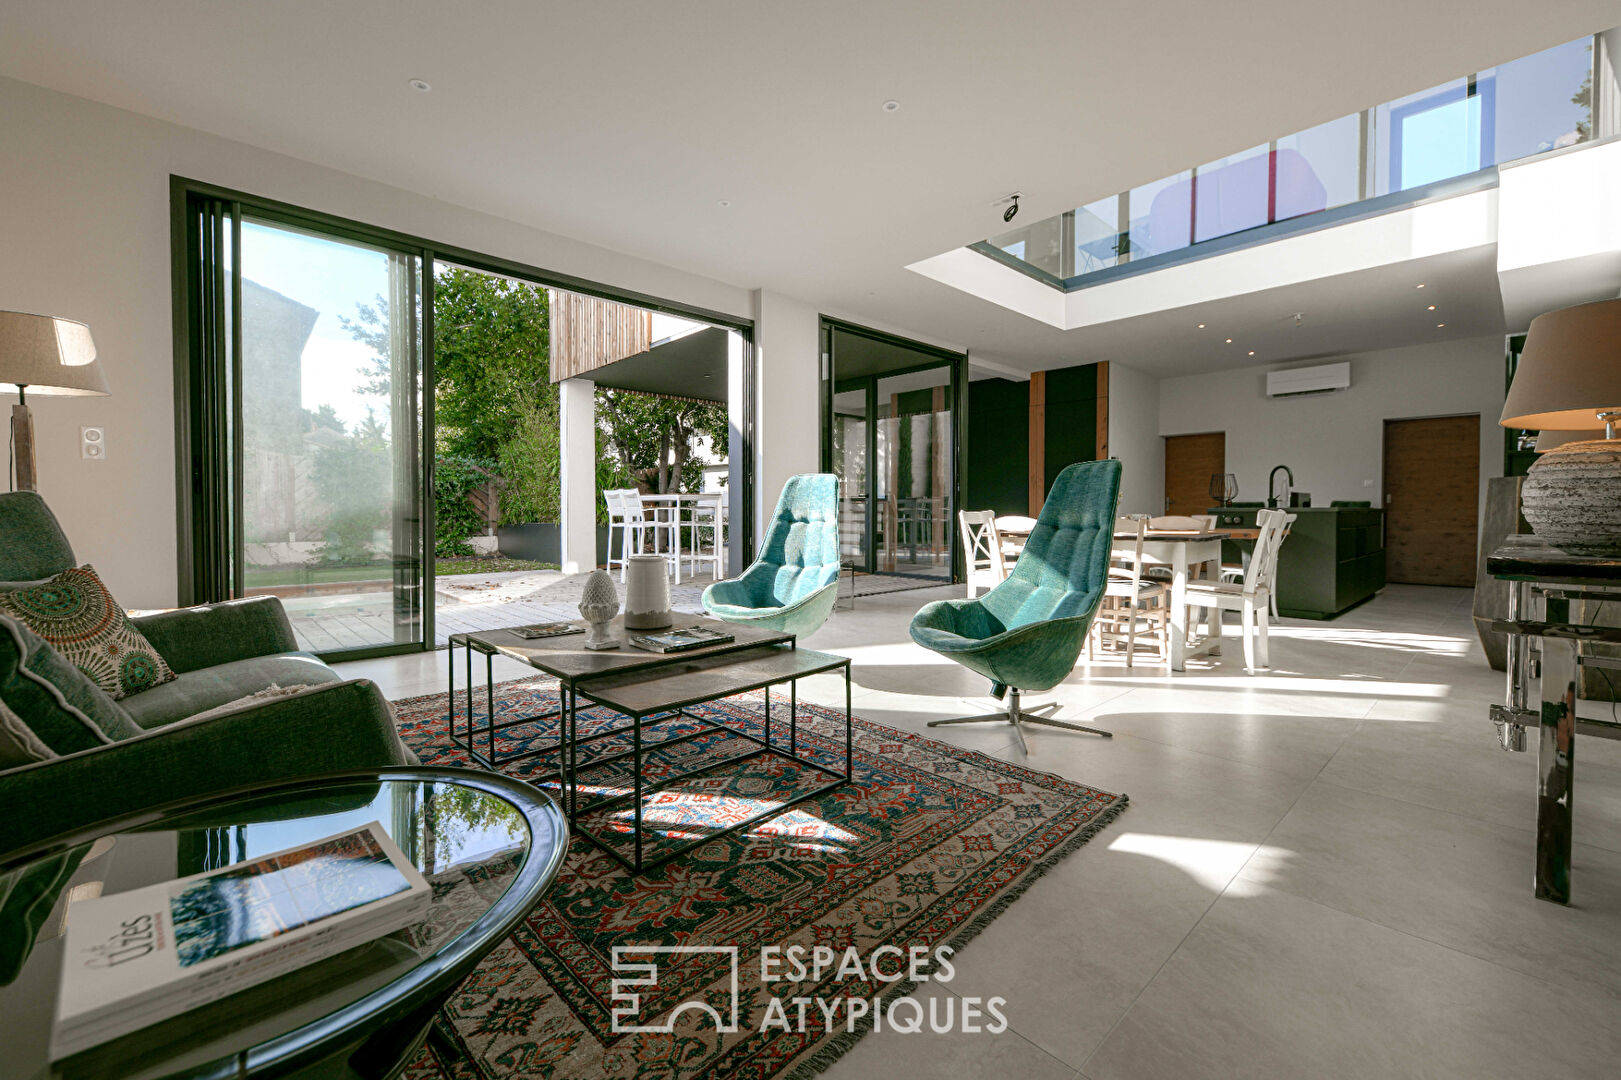 Sleek contemporary in the heart of Uzes